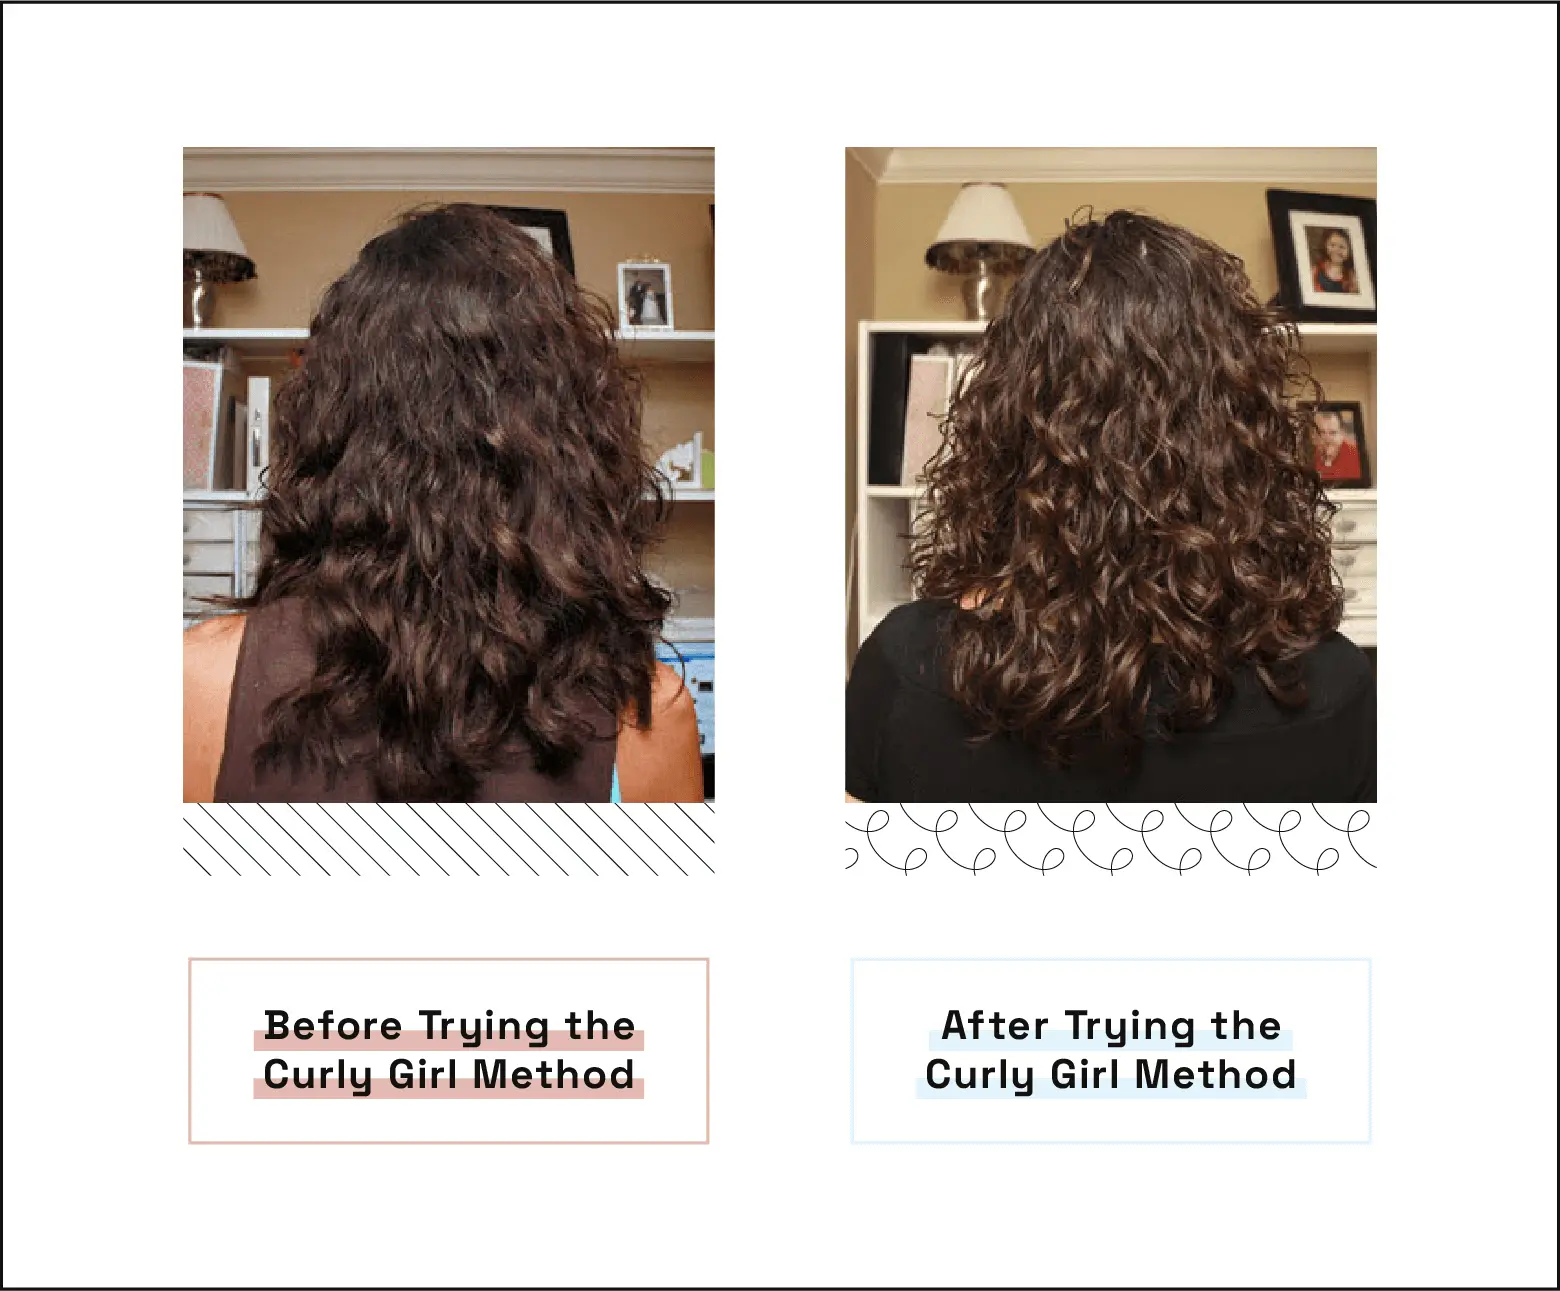 How To Do the Curly Girl Method: A Guide - StyleSeat Pro Beauty Blog